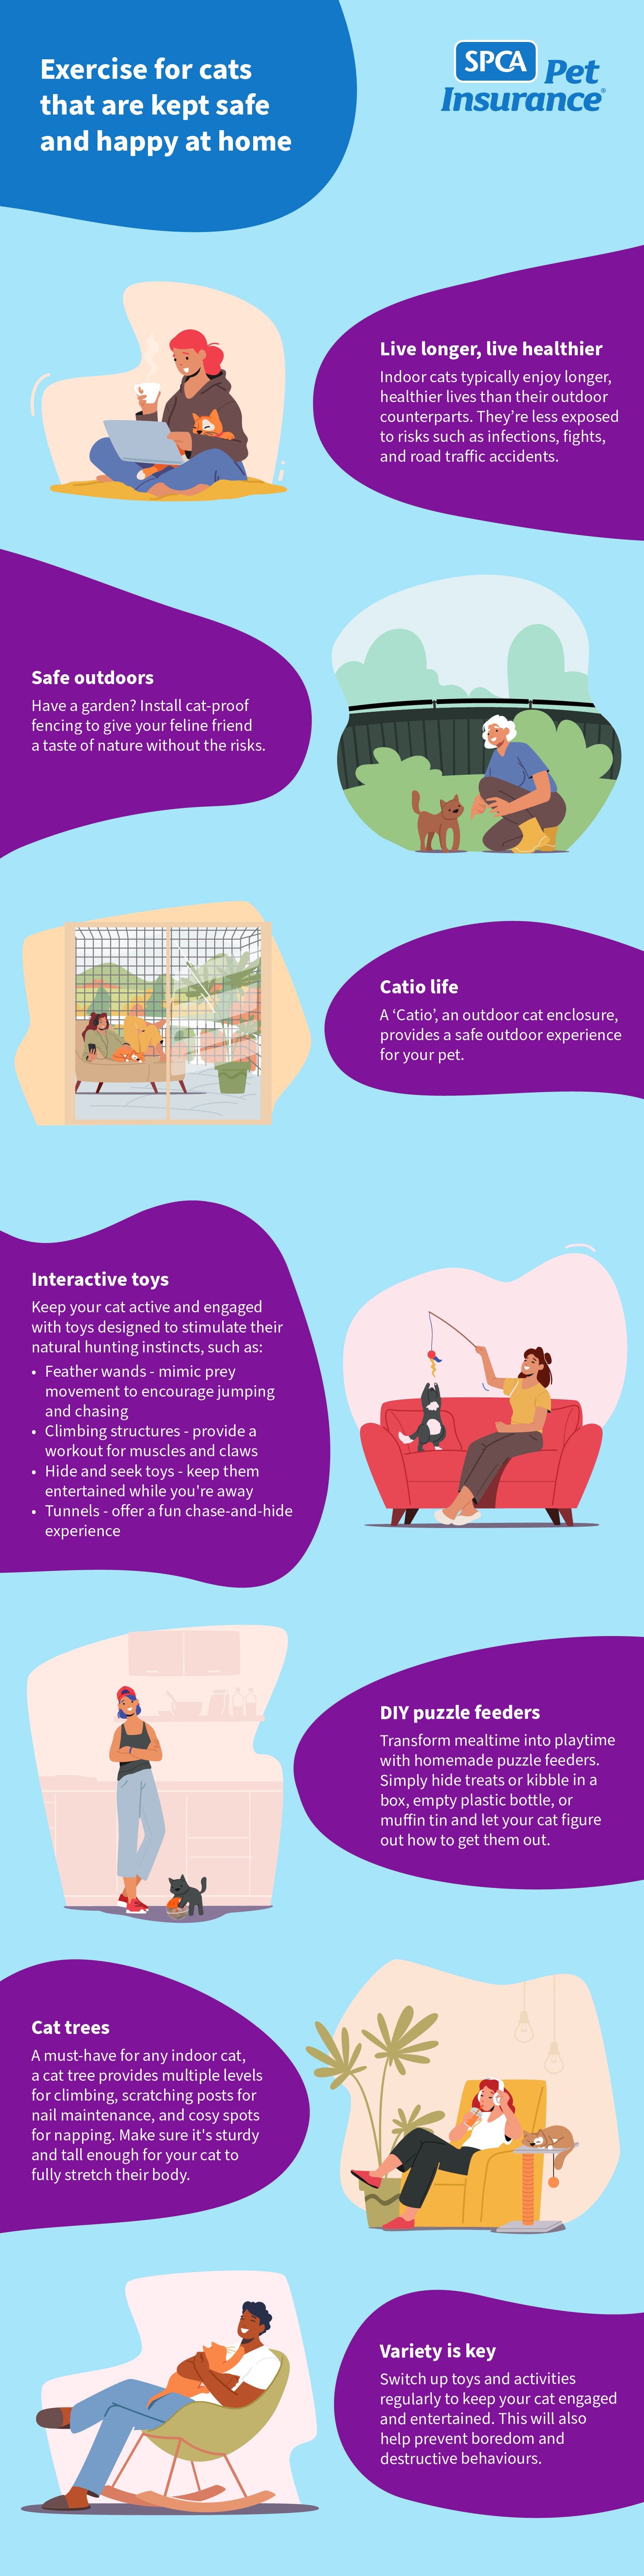 Inside cat safe at home infographic